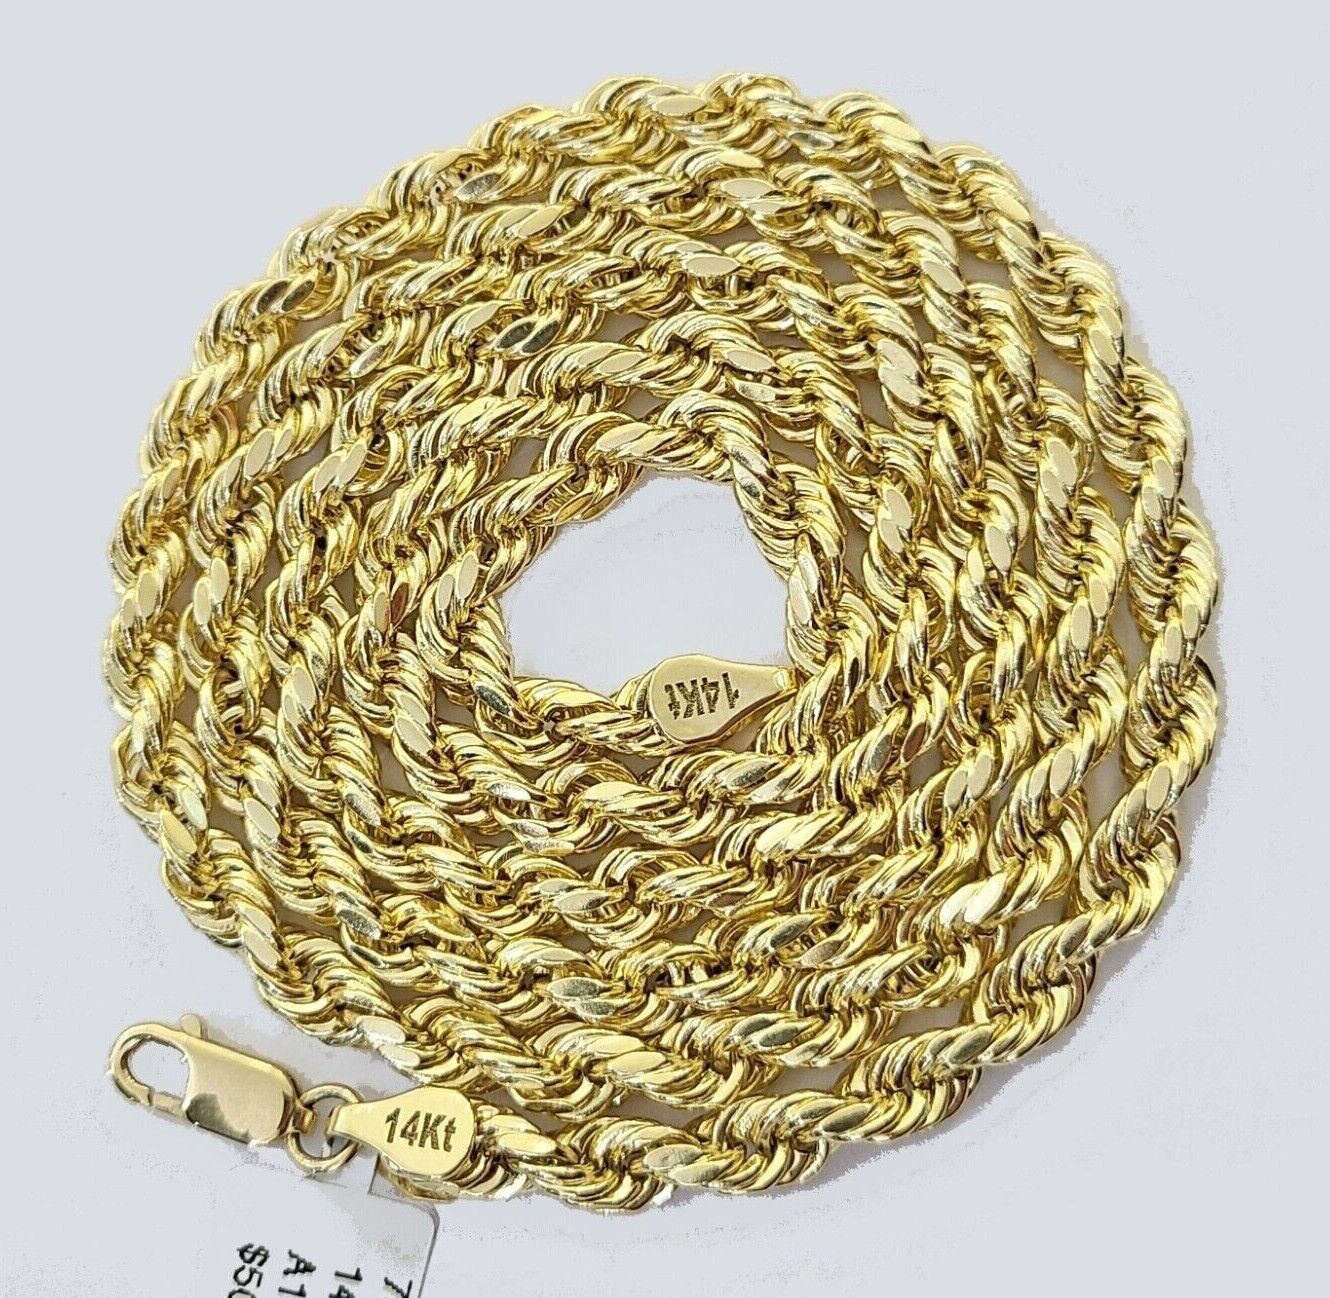 Clearance Pricing BLOWOUT 14K Gold 18 Inch Beaded 3mm Bead Chain